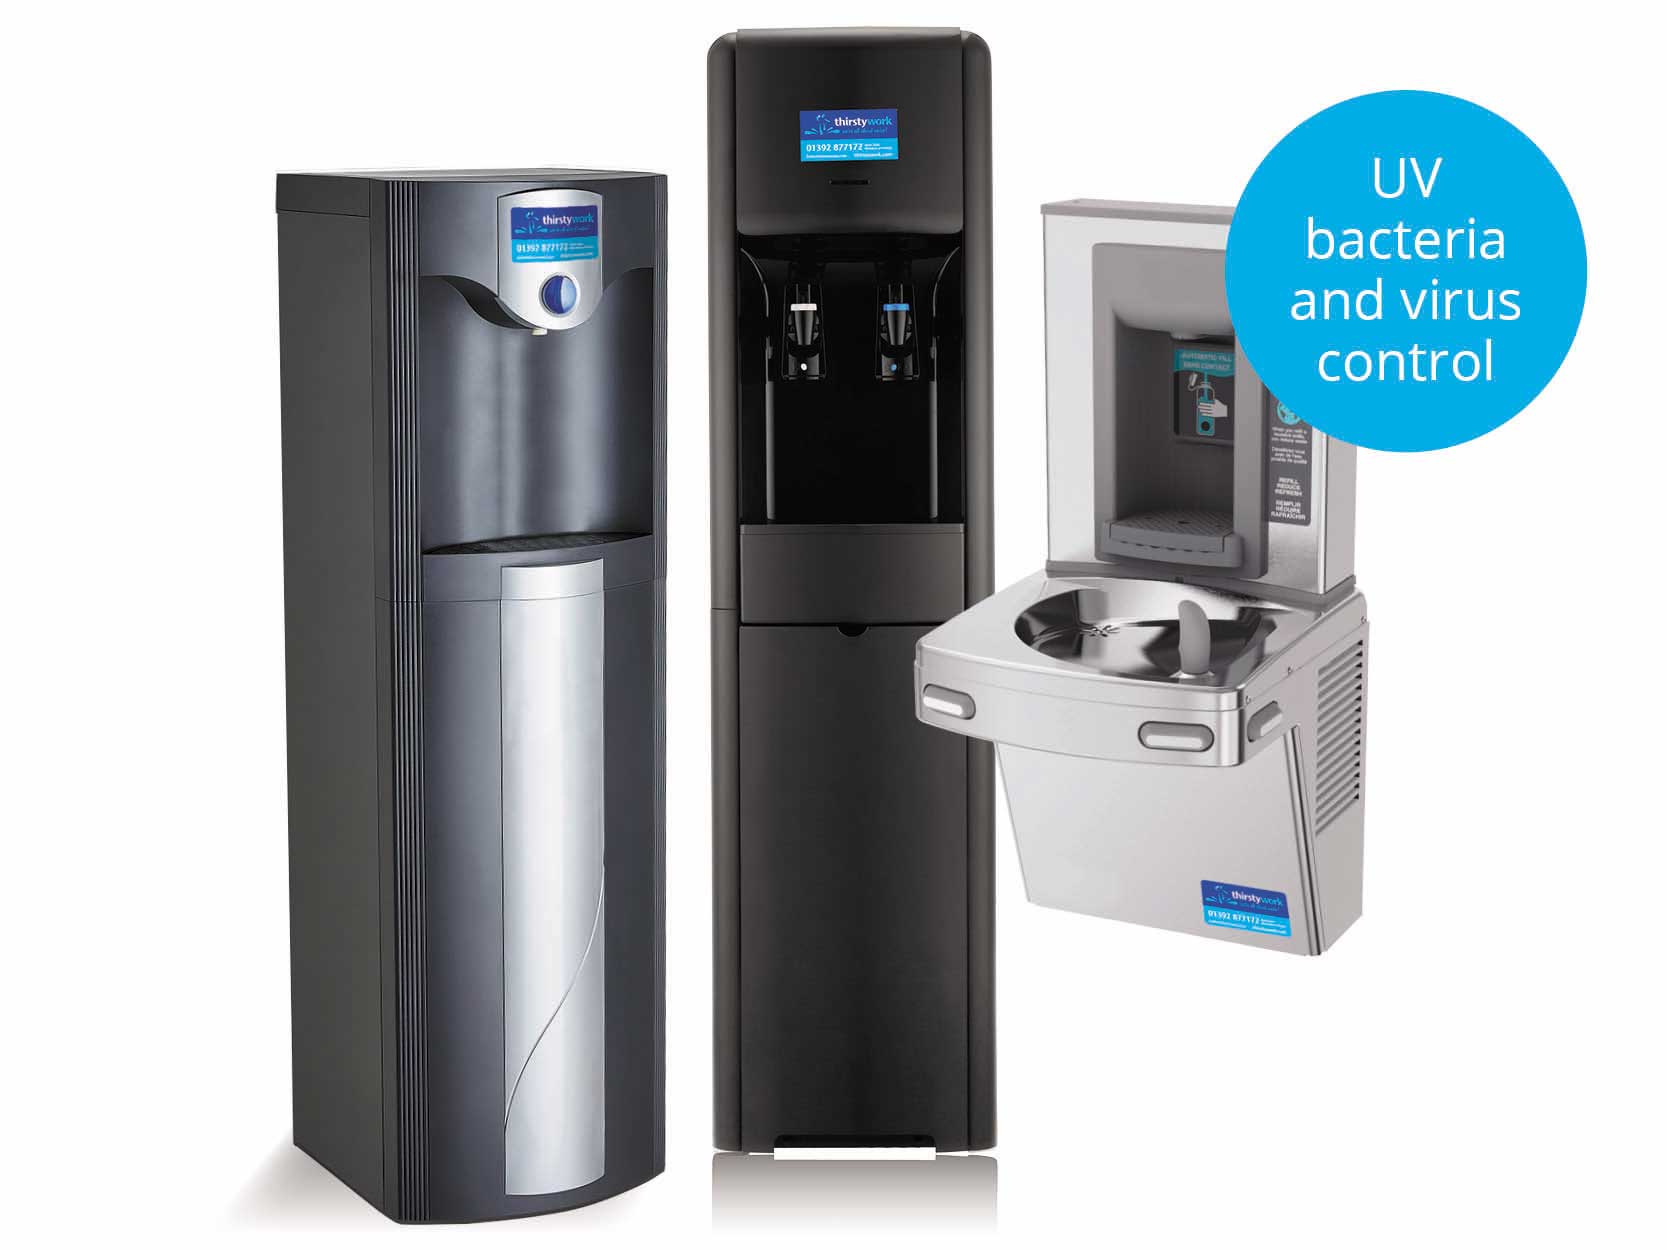 A selection of water coolers and bottle fillers for use in healthcare facilities